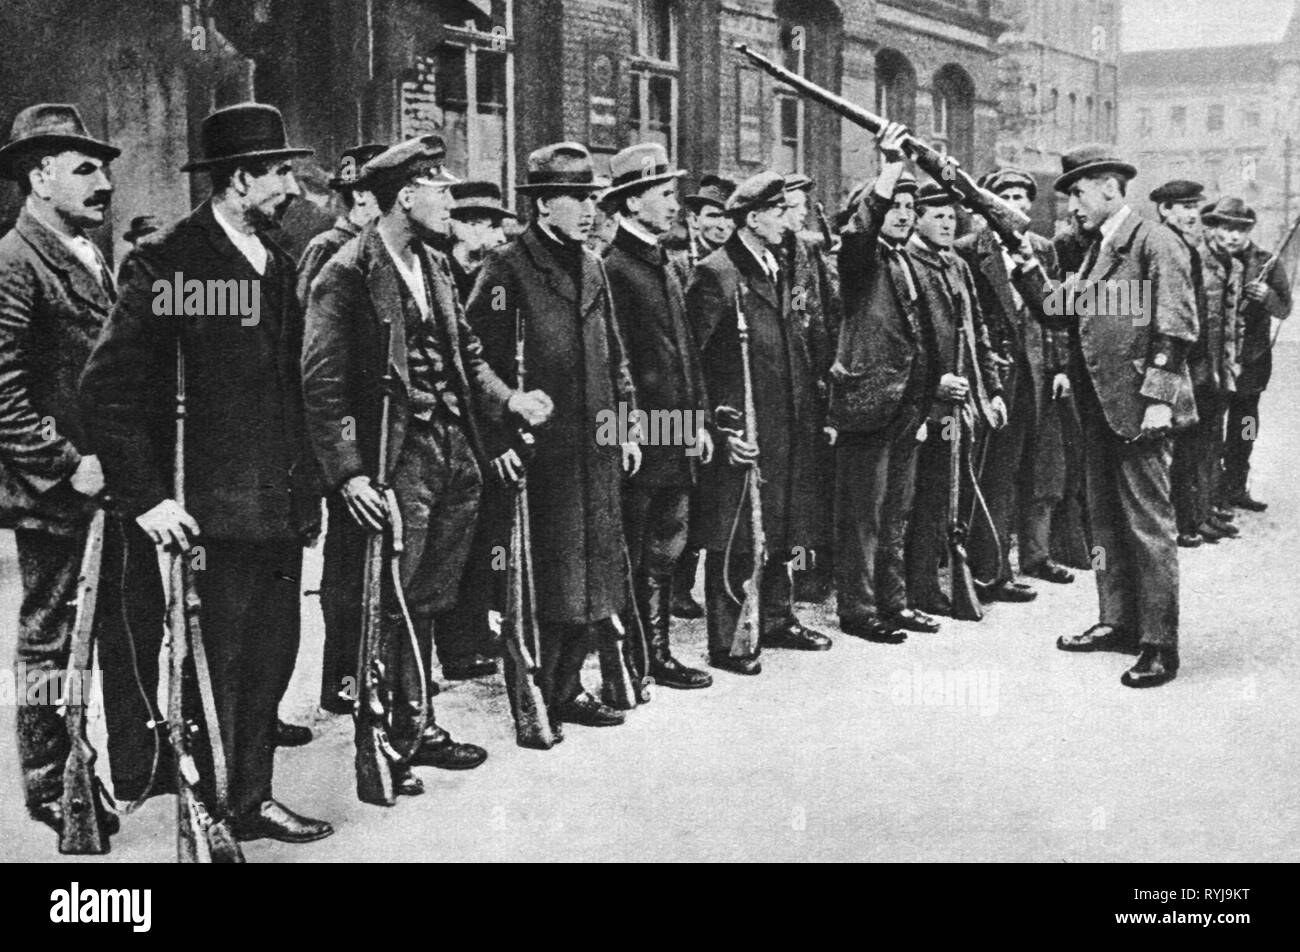 Ruhr Uprising, 13.3. - 12.4. 1920, inspection at a unit of the Red Ruhr Army, March 1920, March uprising, Ruhr war, Ruhr conflict, insurgency, rebellion, insurgencies, revolts, rebellions, in revolt, crisis, crises, arm, weapon, weapons, arms, rifle, gun, rifles, guns, rifle inspection, volunteer, volunteers, worker, workers, Red Army, communist, communists, Ruhr area, Ruhr Valley, North Rhine-Westphalia, North-Rhine, Rhine, Westphalia, Nordrhein-Westfalen, Nordrhein-Westphalen, Free State of Prussia, Rhine Province, Germany, German Reich, Weimar, Additional-Rights-Clearance-Info-Not-Available Stock Photo